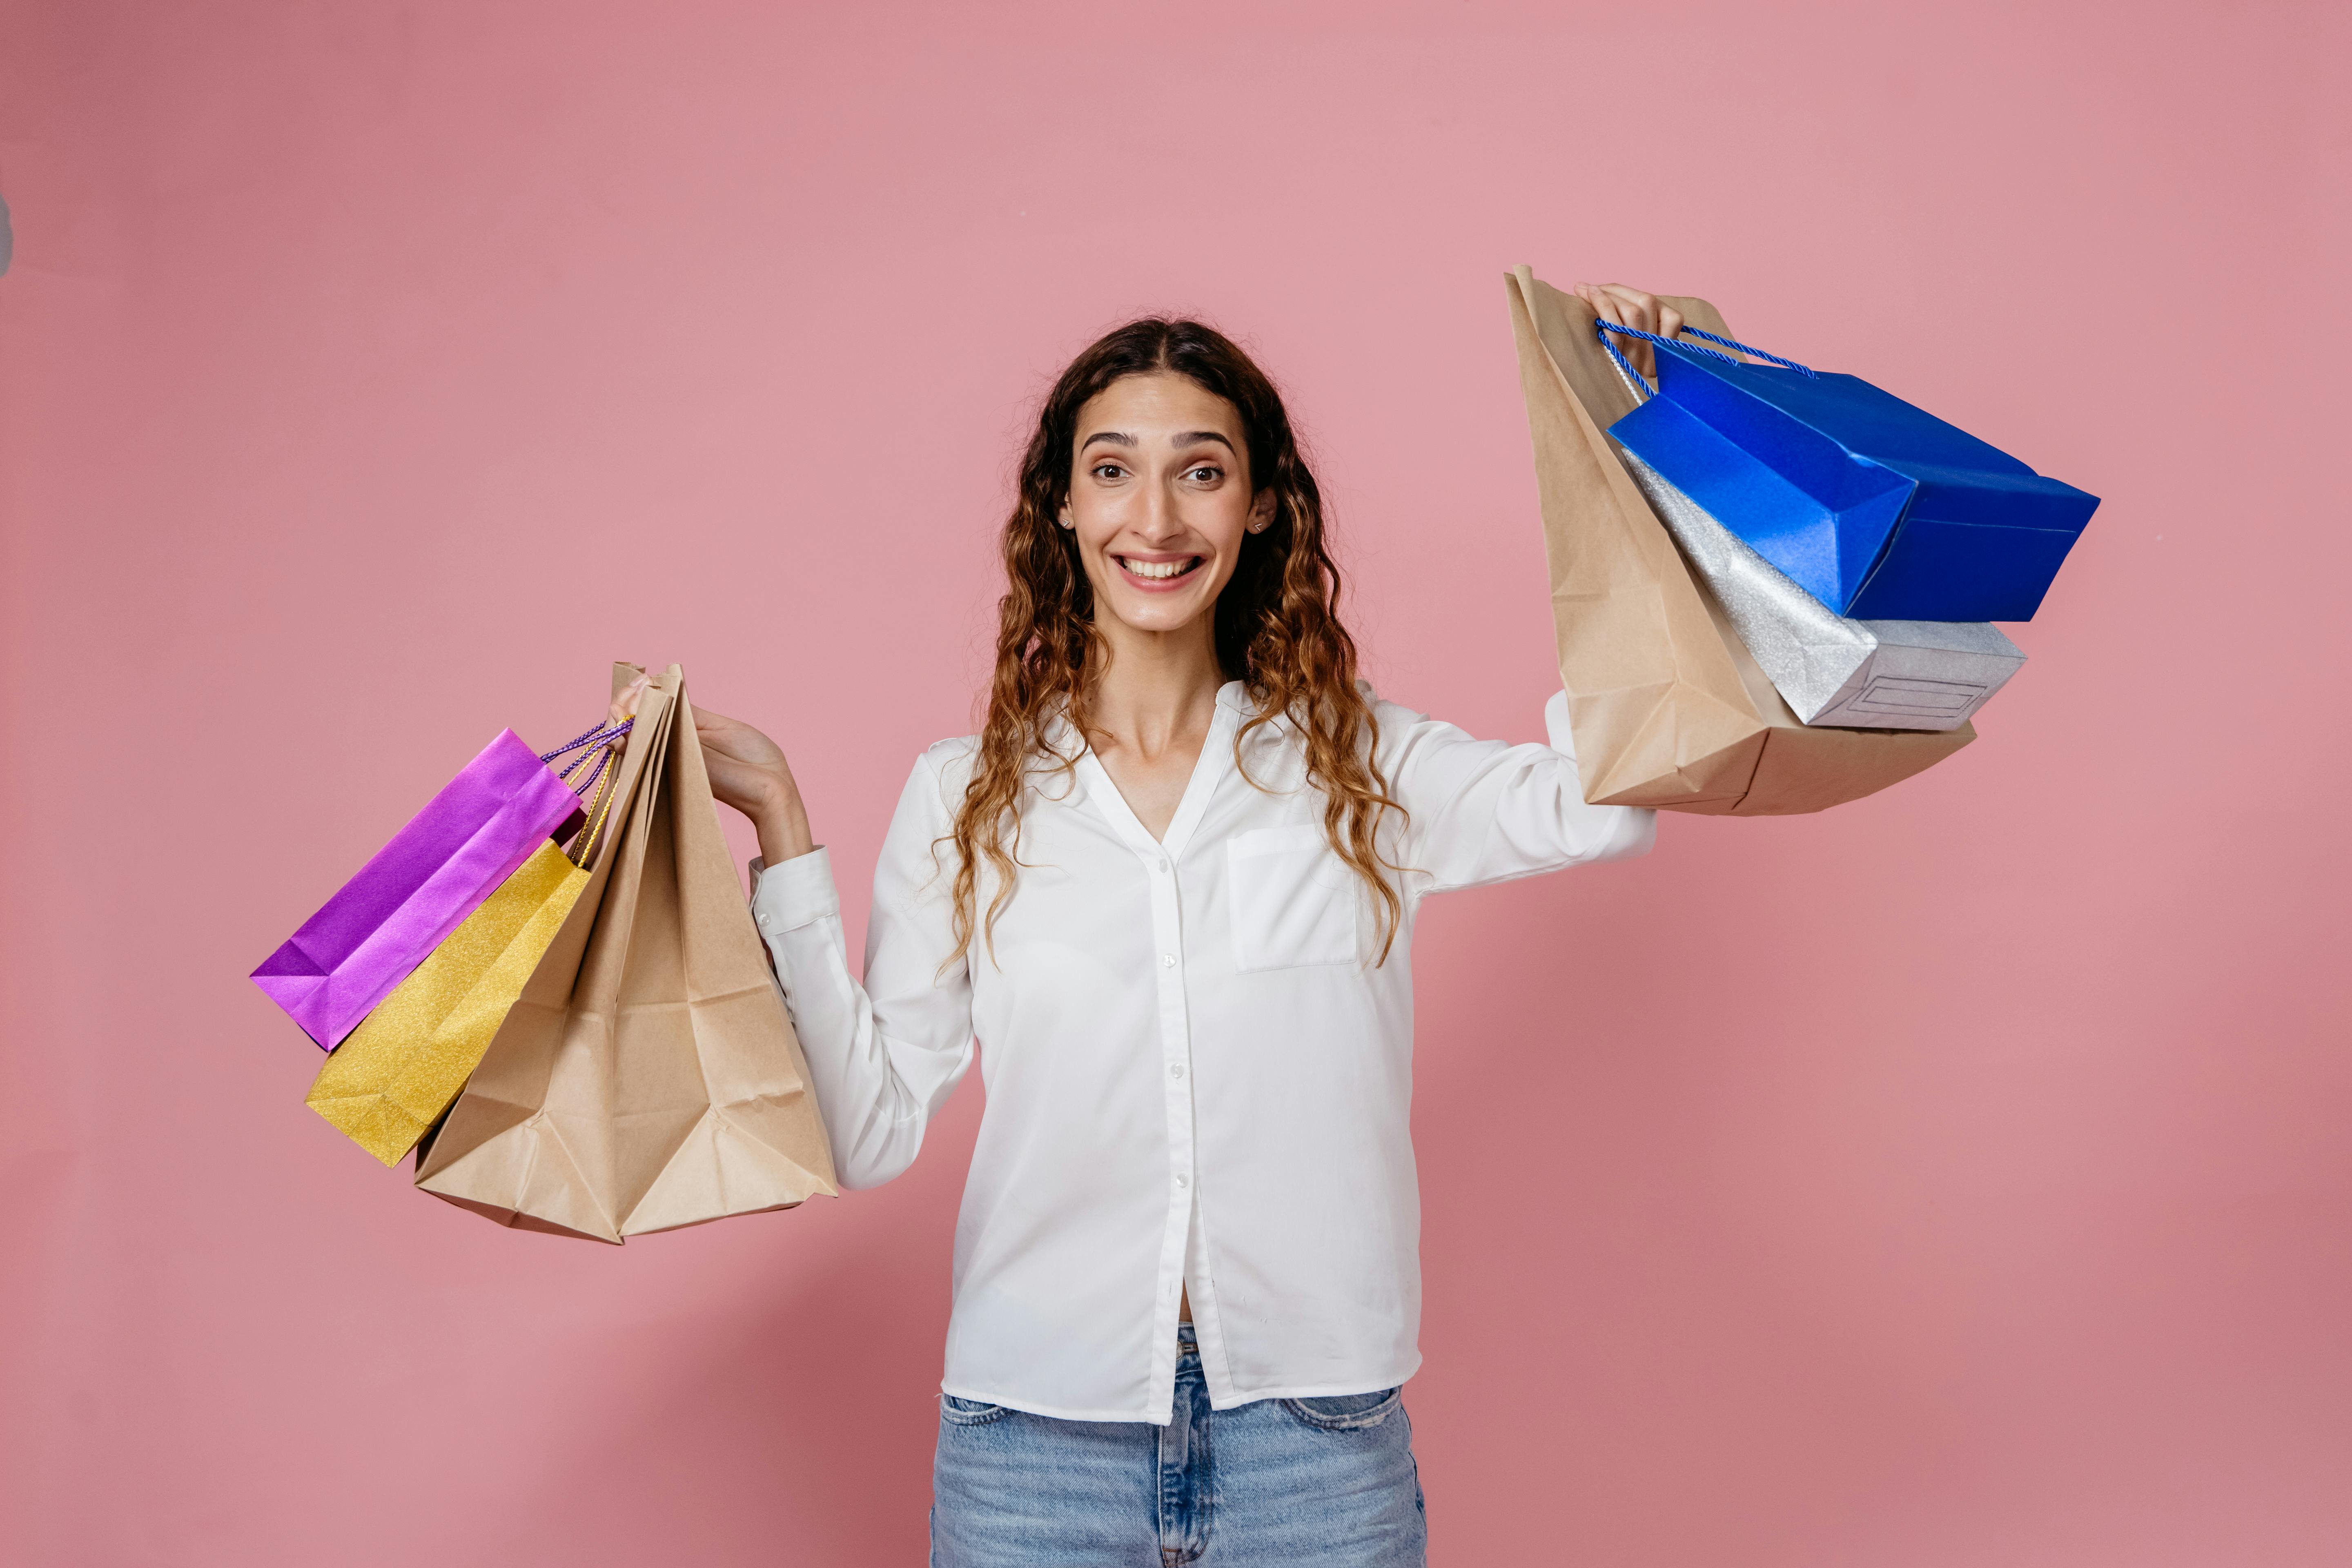 woman in white dress shirt and blue denim jeans holding shopping bags